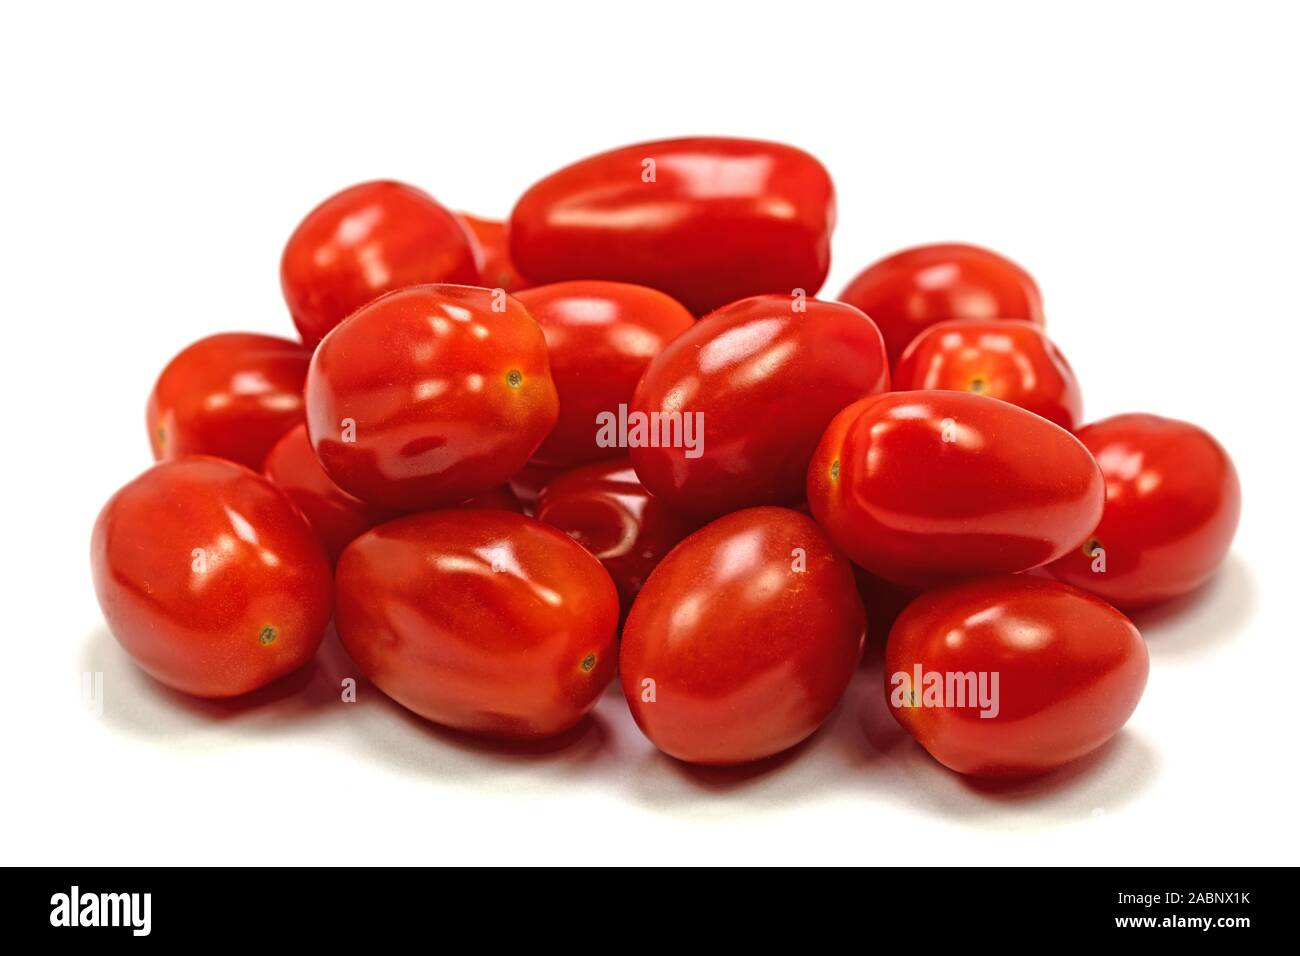 Date cherry tomatoes in front of white background Stock Photo